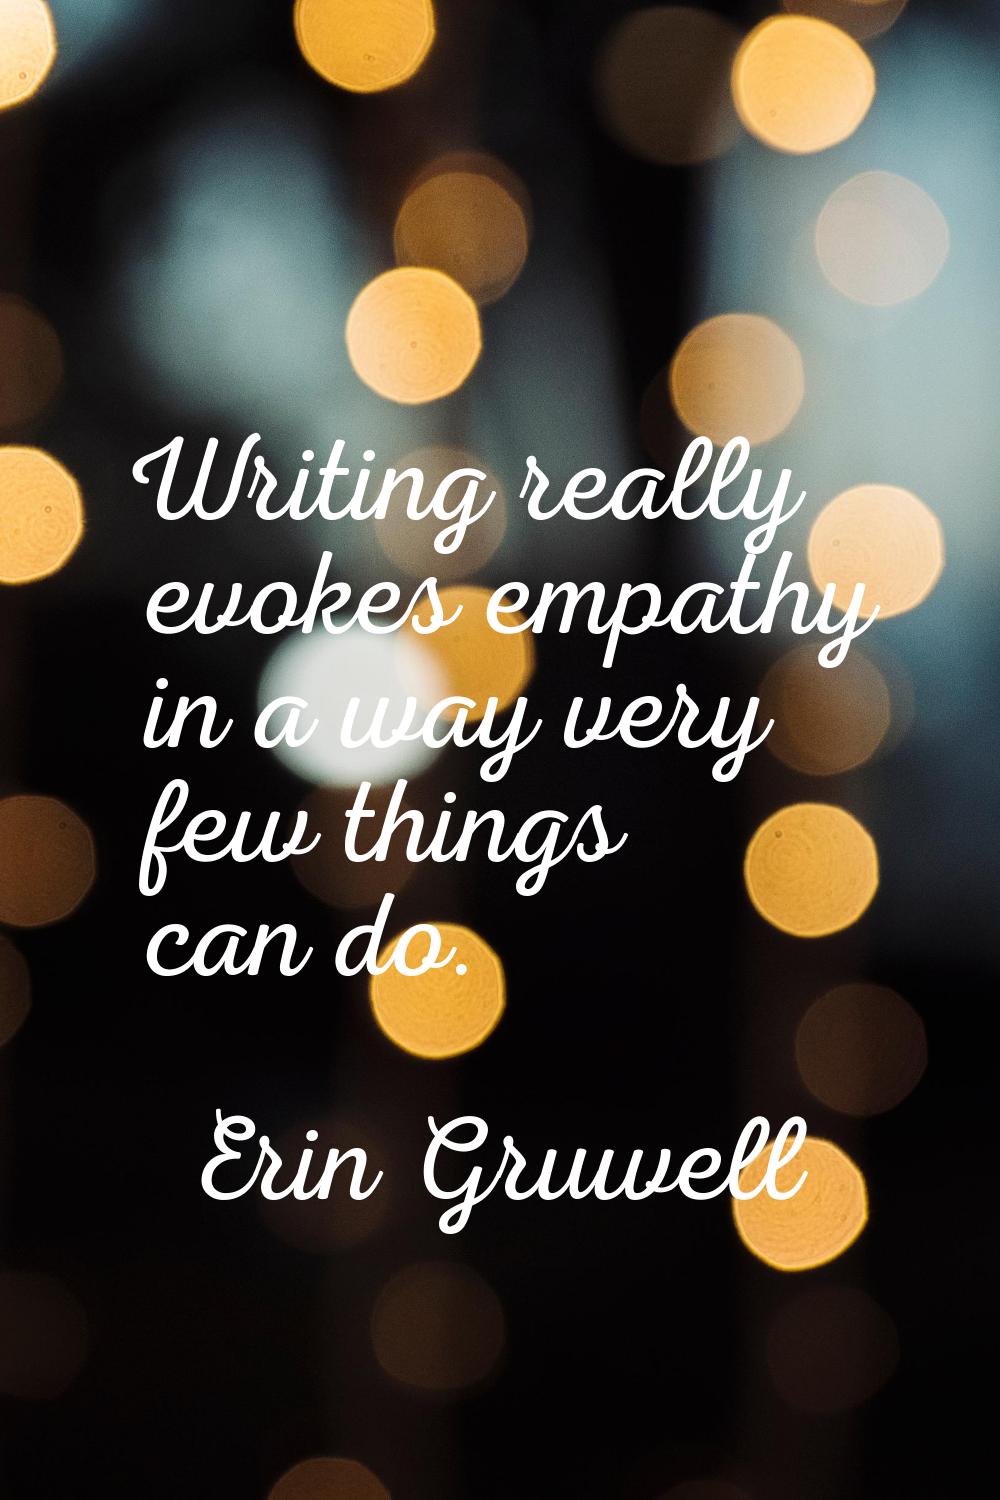 Writing really evokes empathy in a way very few things can do.